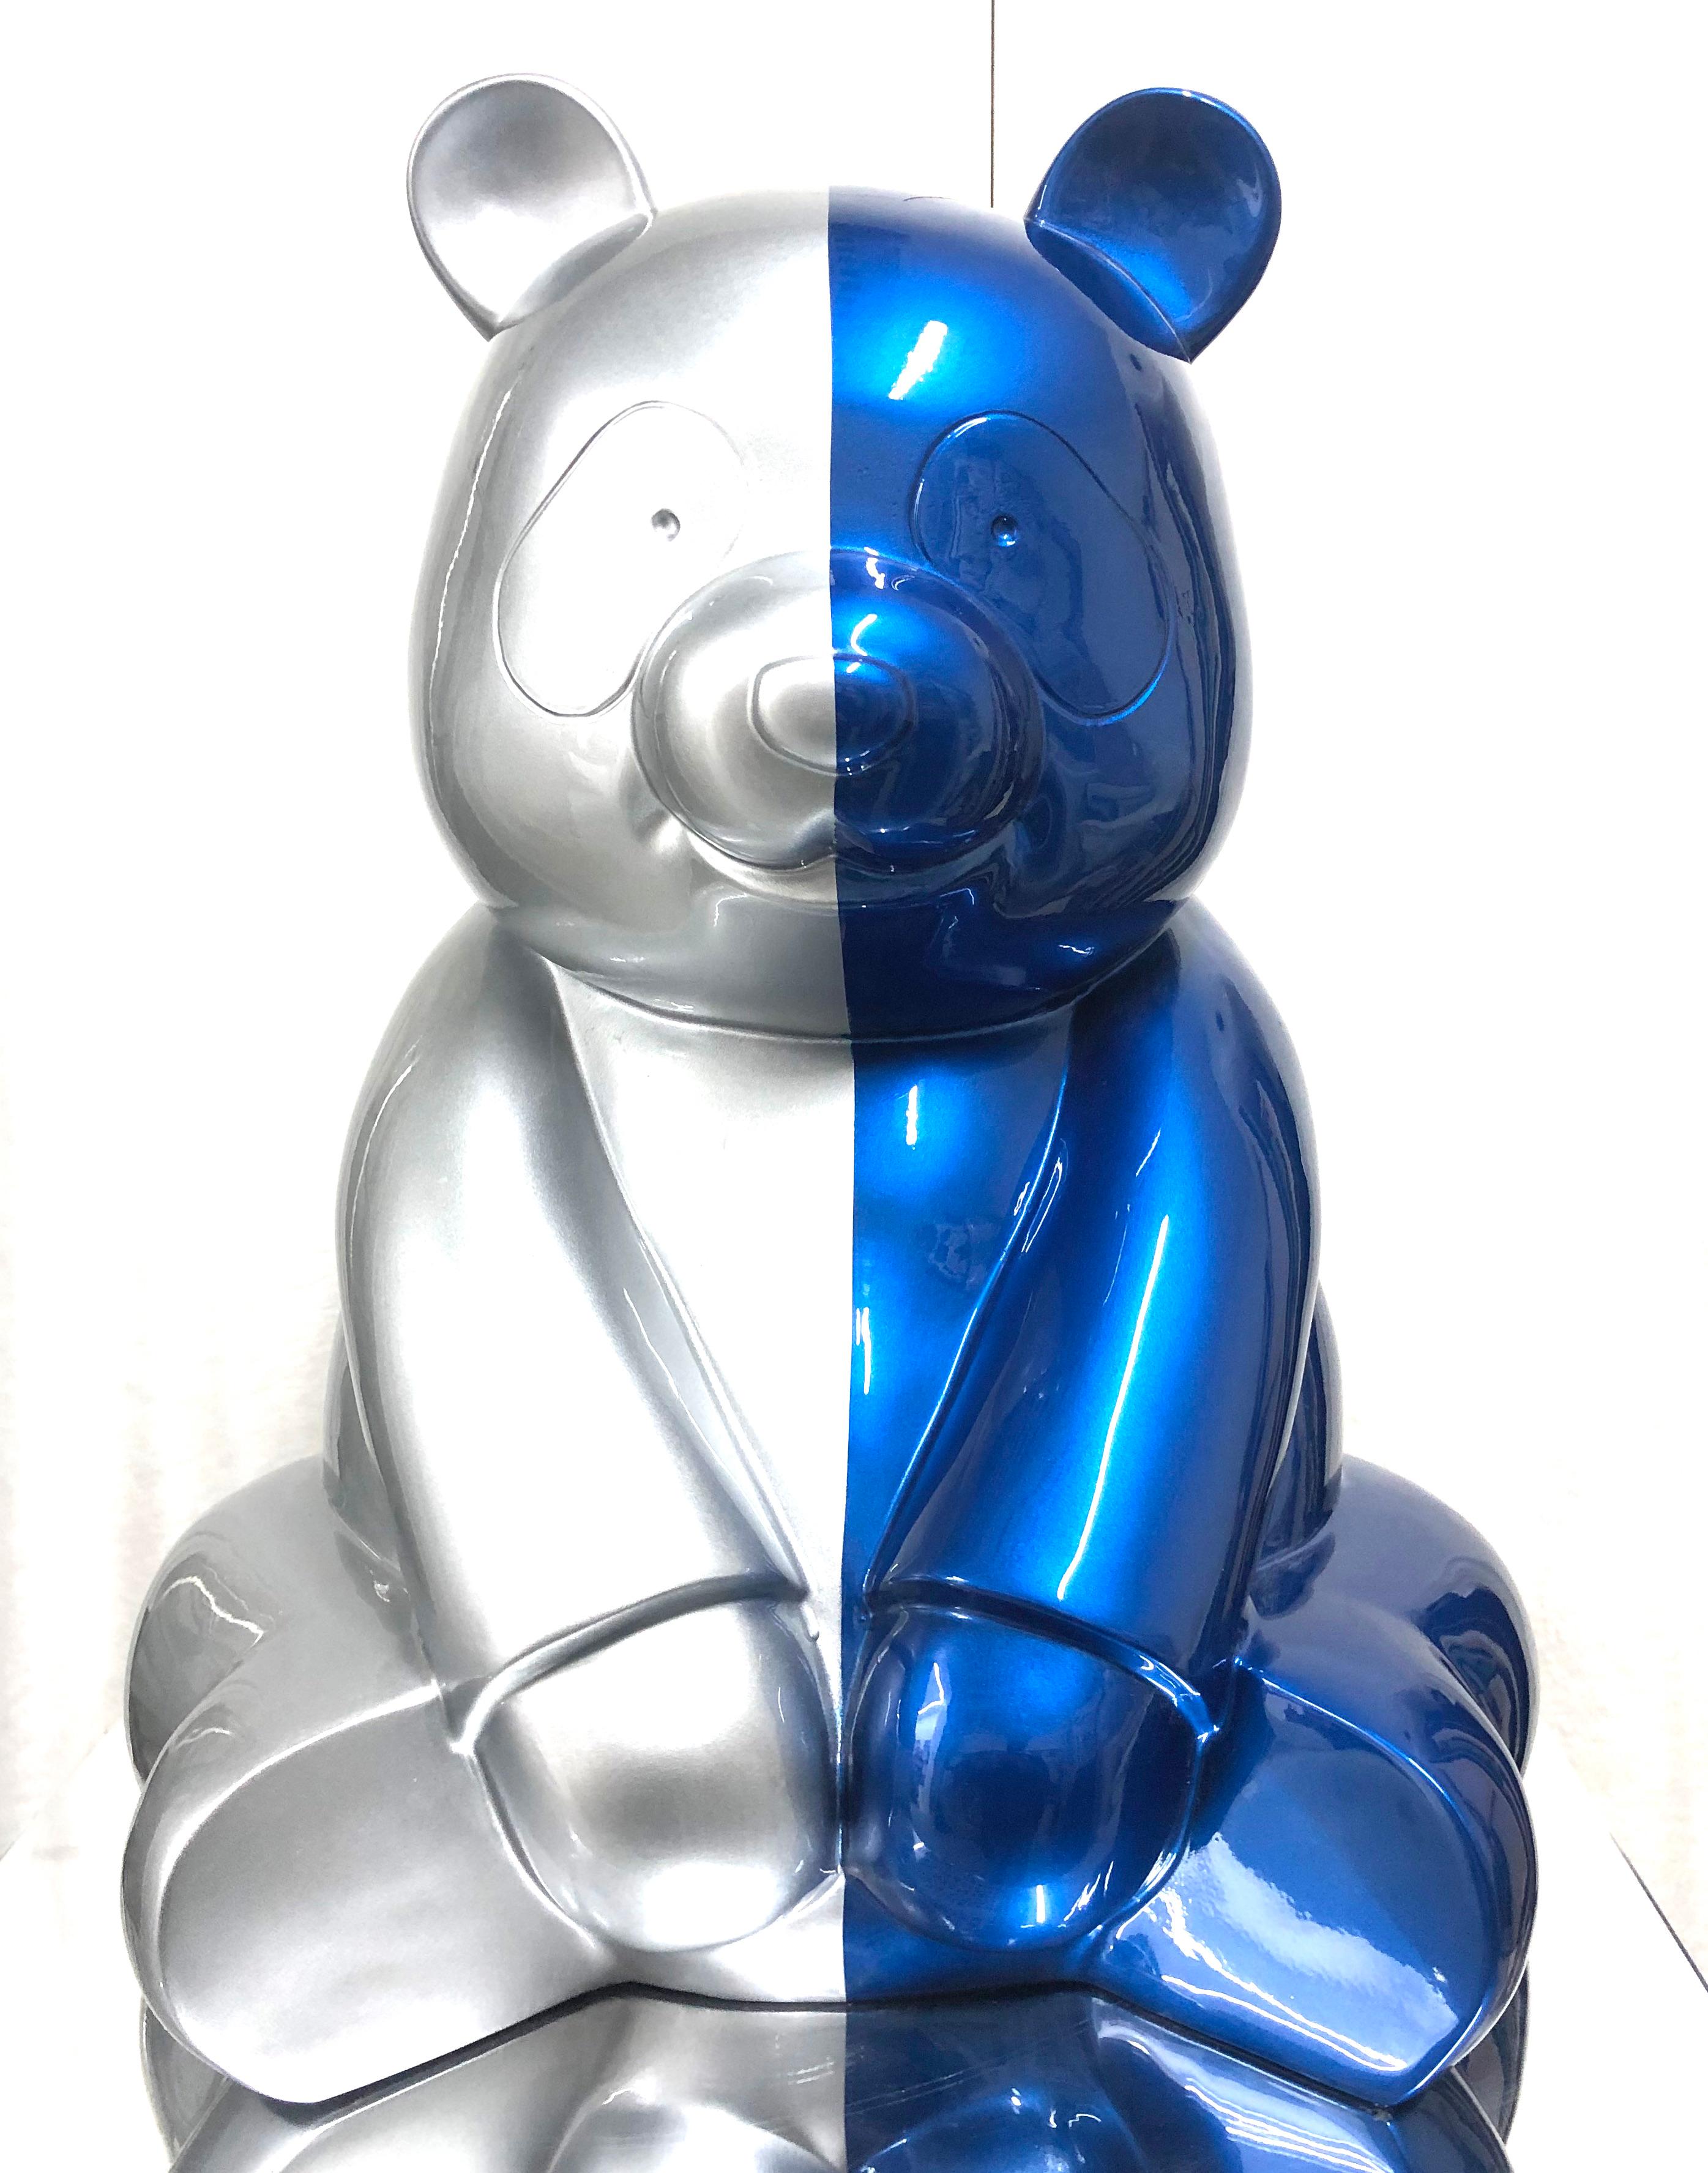 The United Pandasan  : Spectral Symmetry Blu & Silver - Sculpture by HIRO ANDO